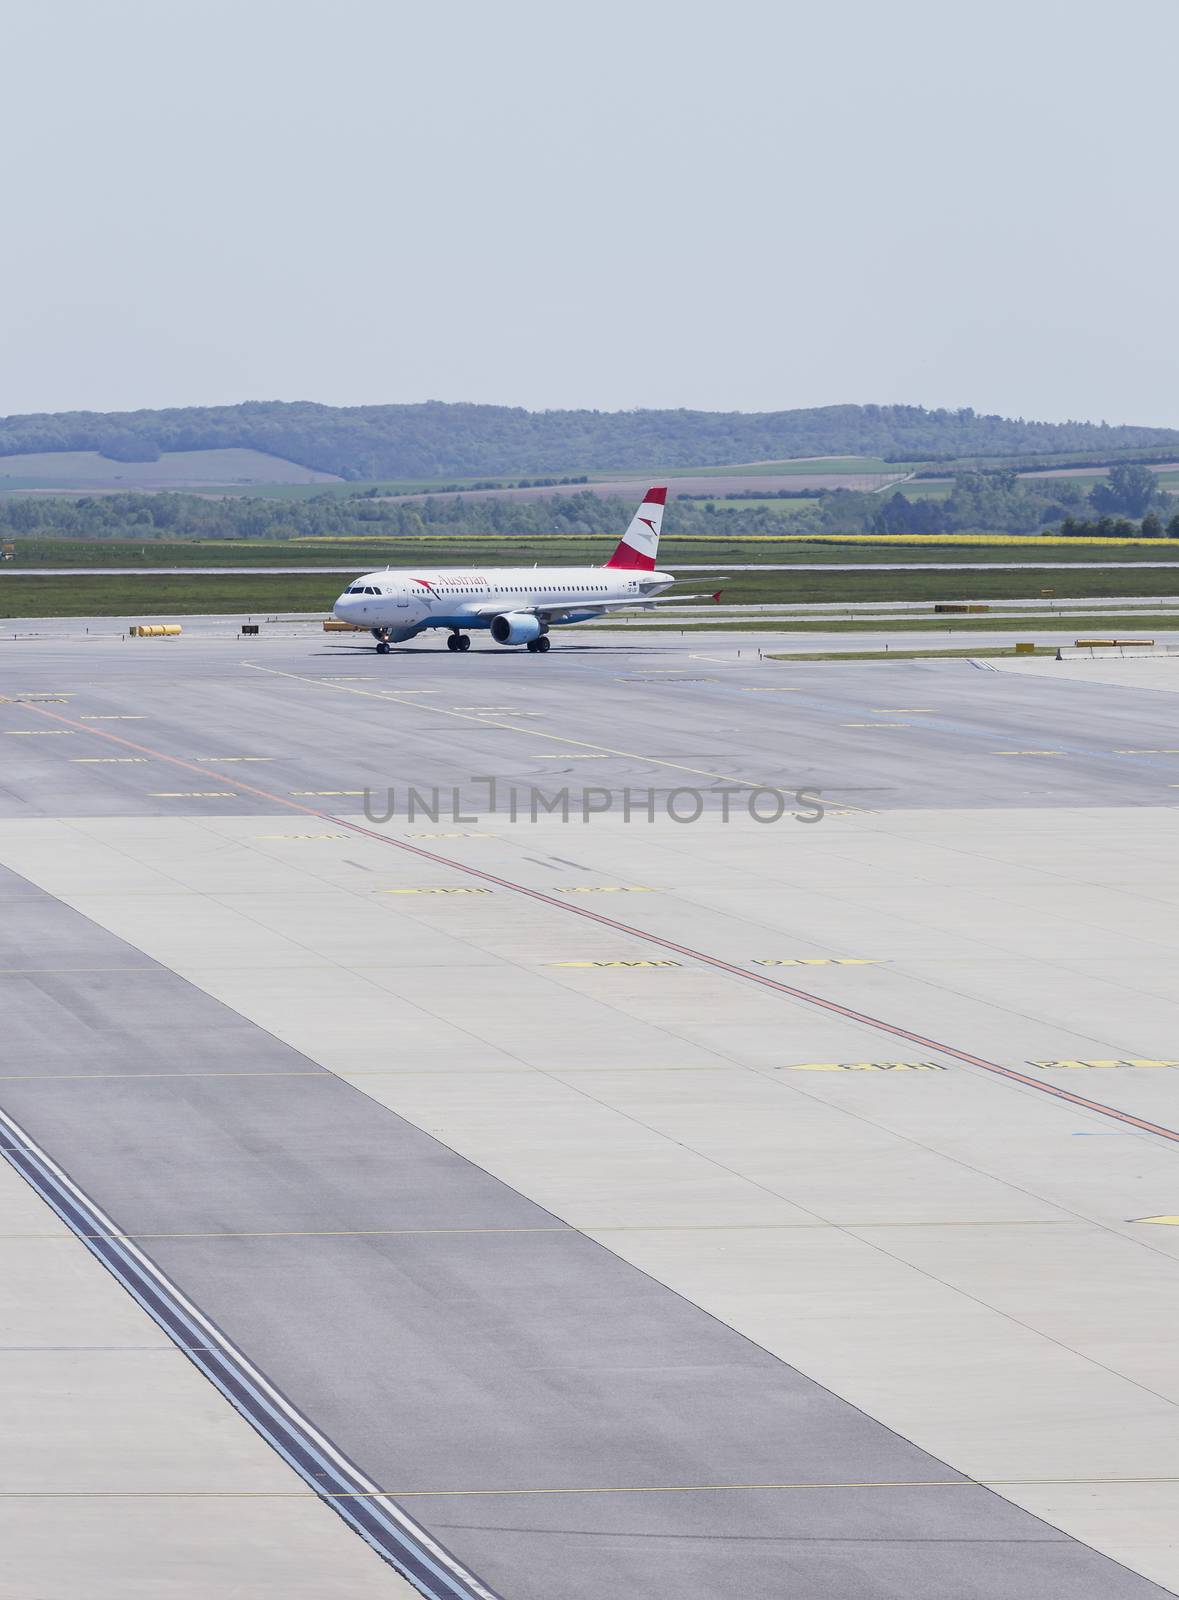 VIENNA, AUSTRIA – APRIL 30th 2016: Plane arriving to terminal area at Vienna International Airport on a busy Saturday.